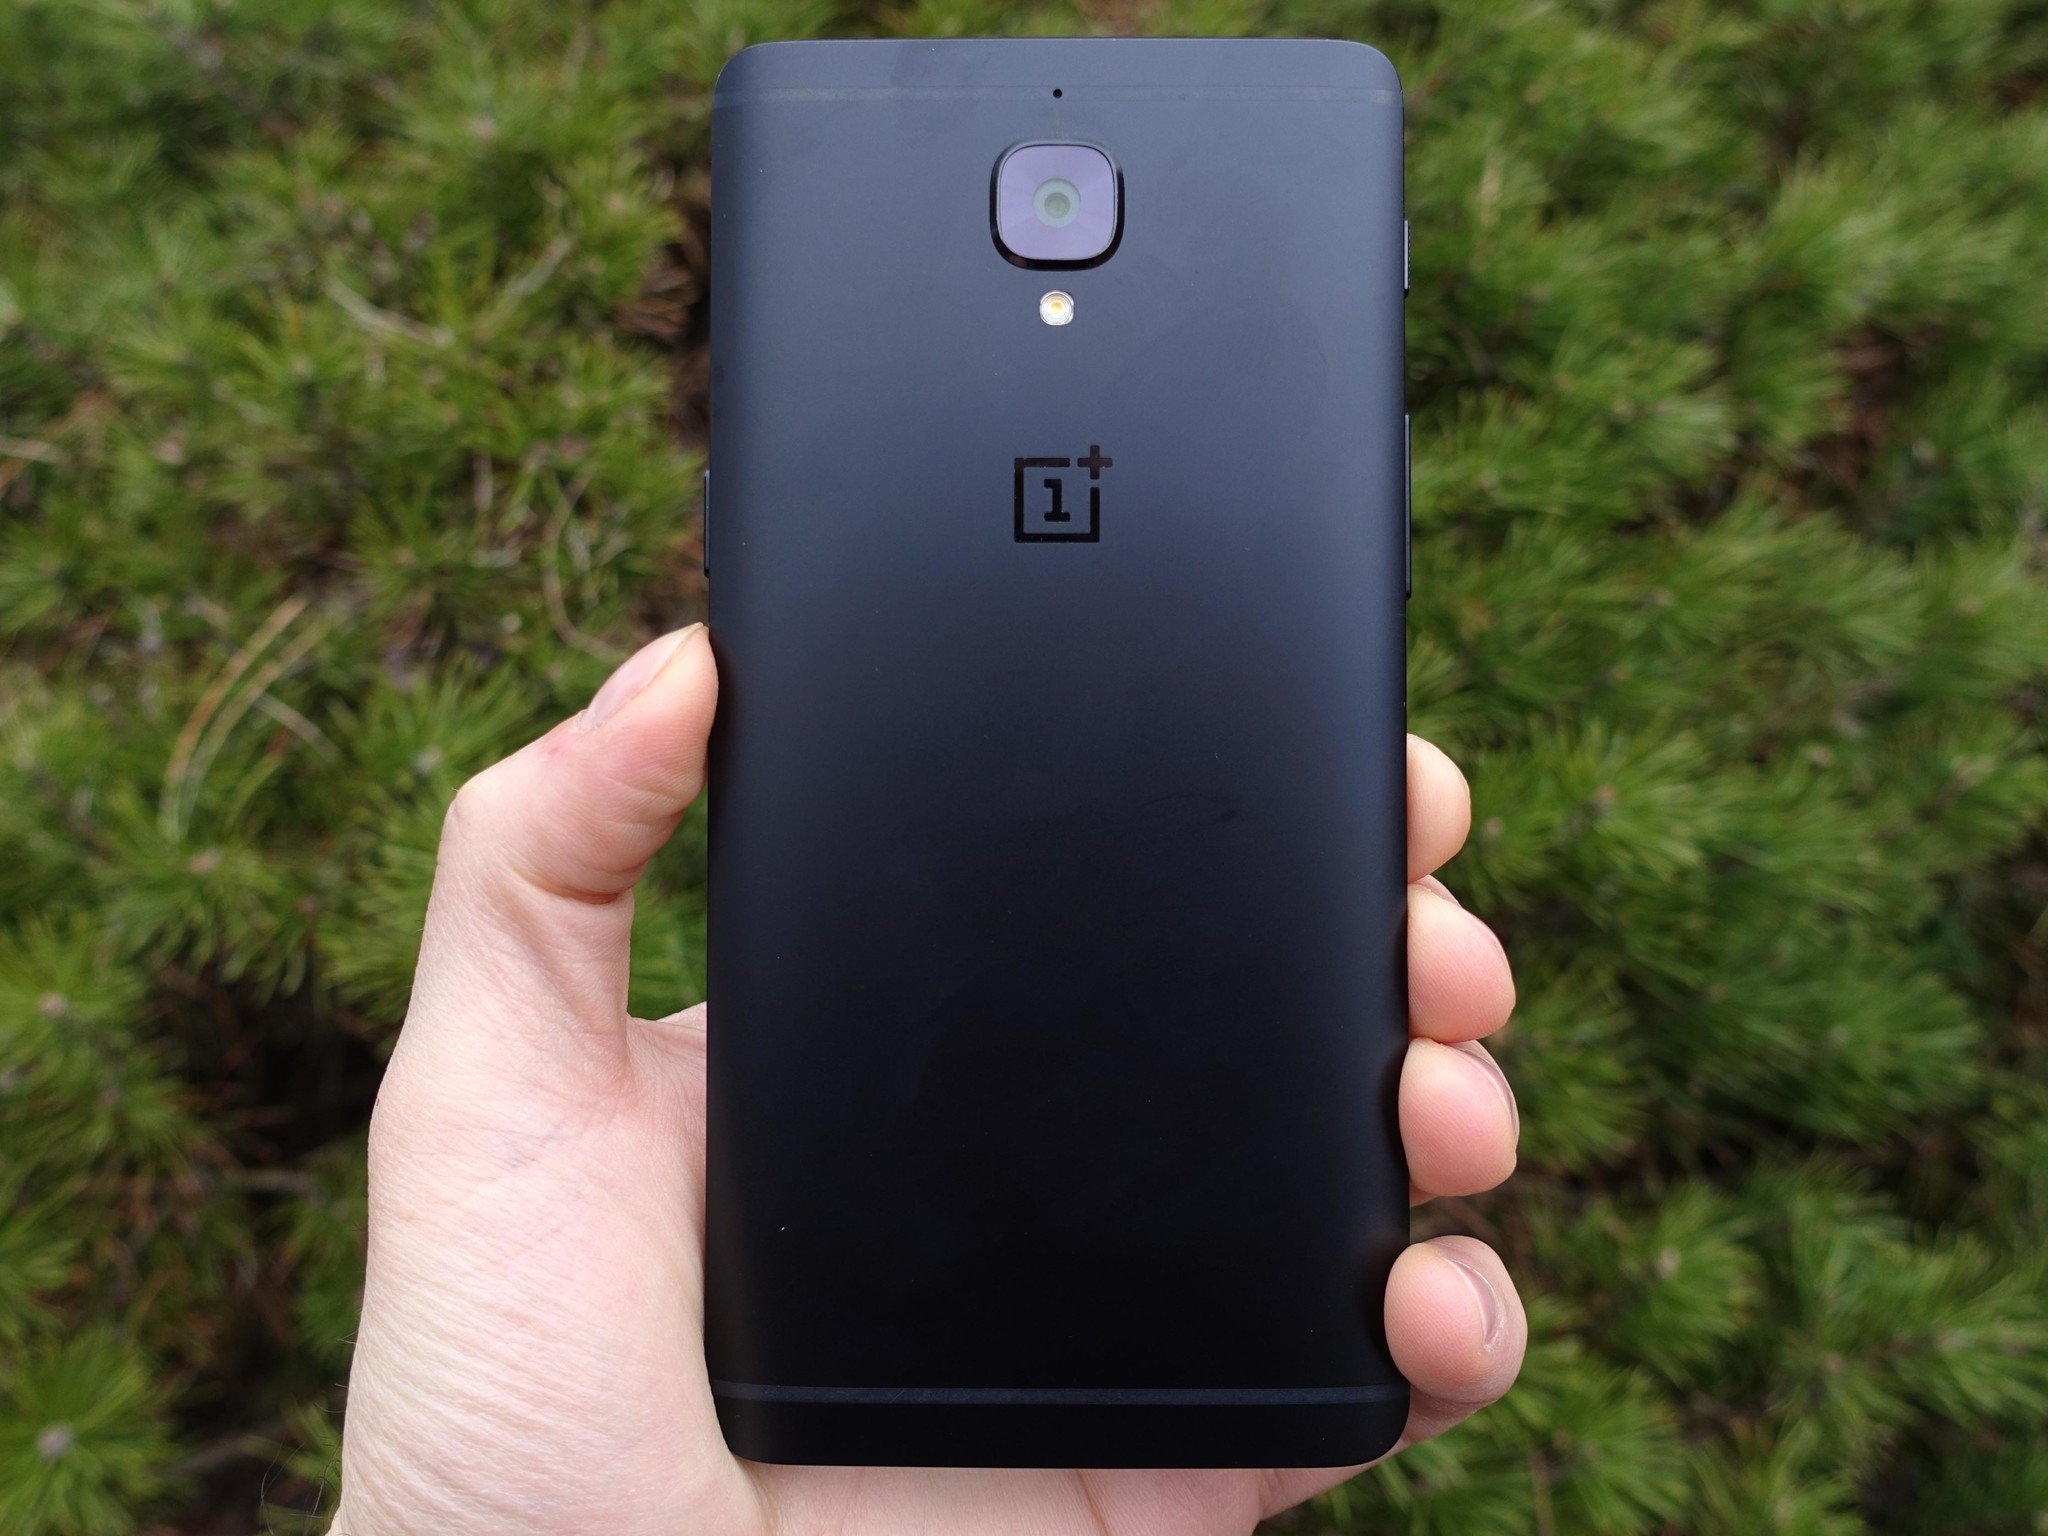 Official Android 8.0 Oreo Beta now available for OnePlus 3 and OnePlus 3T